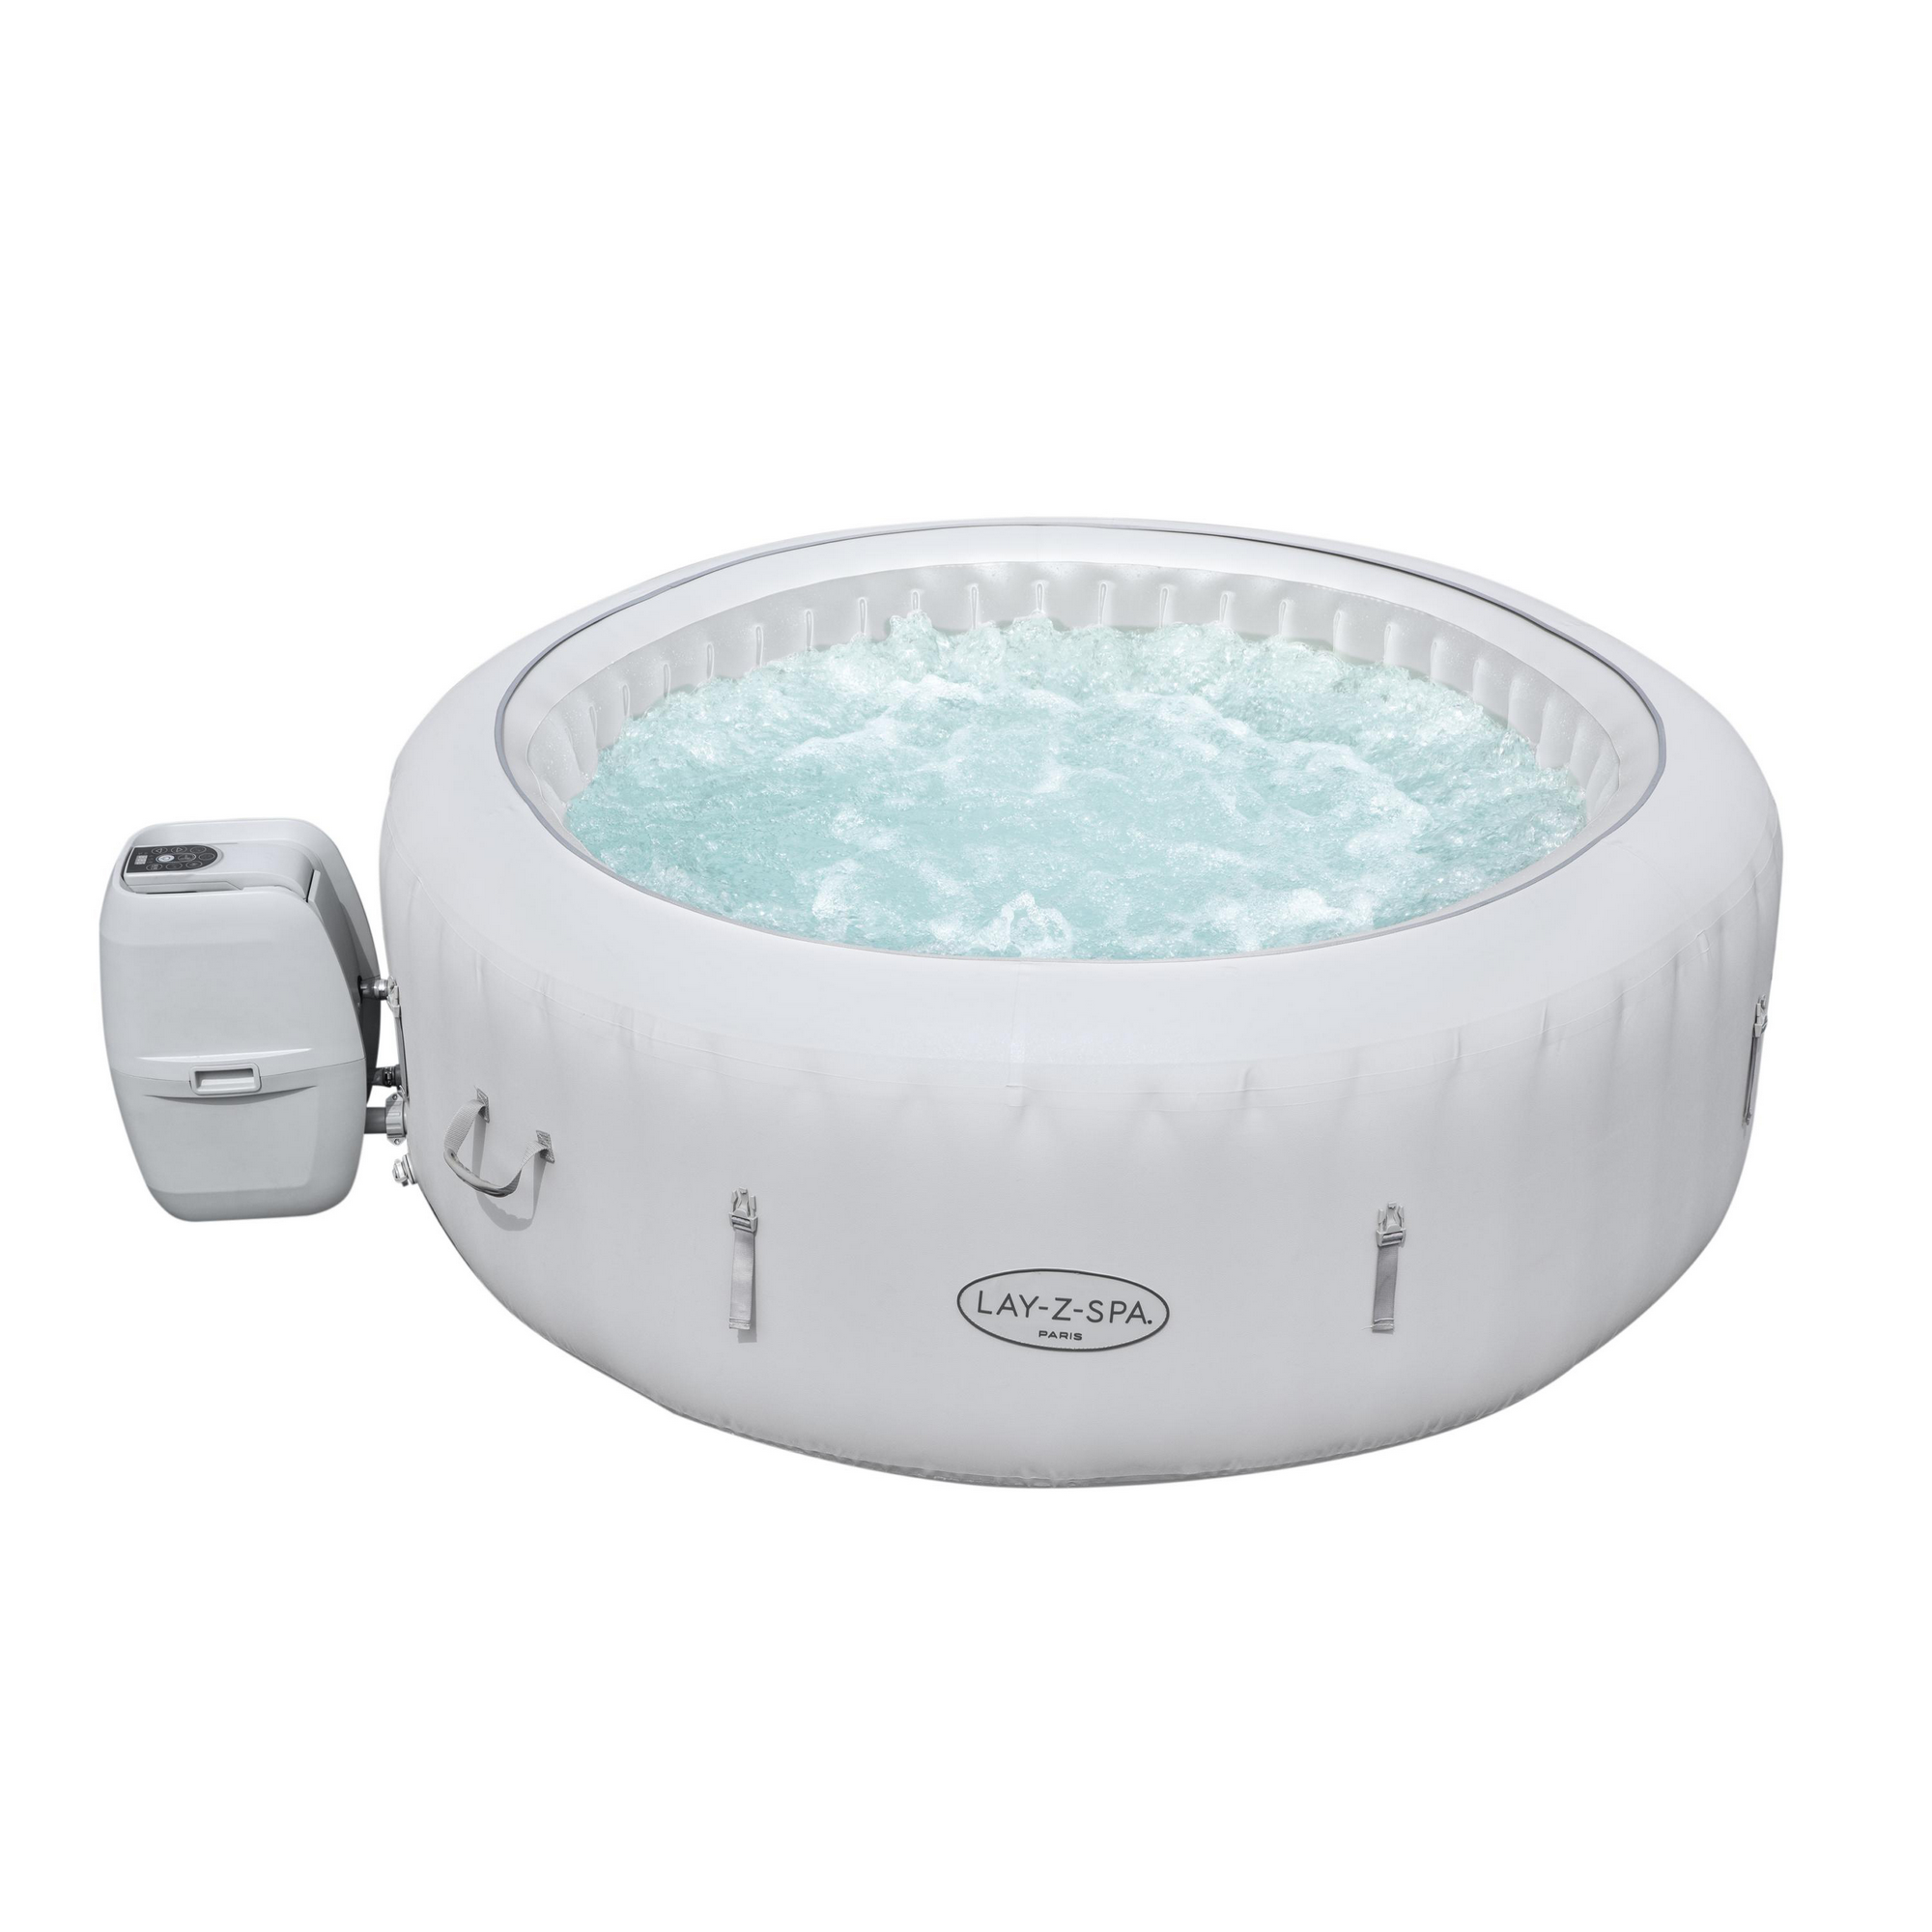 Whirlpool 'Lay-Z-Spa™ Paris AirJet' weiß Ø 196 x 66 cm + product picture